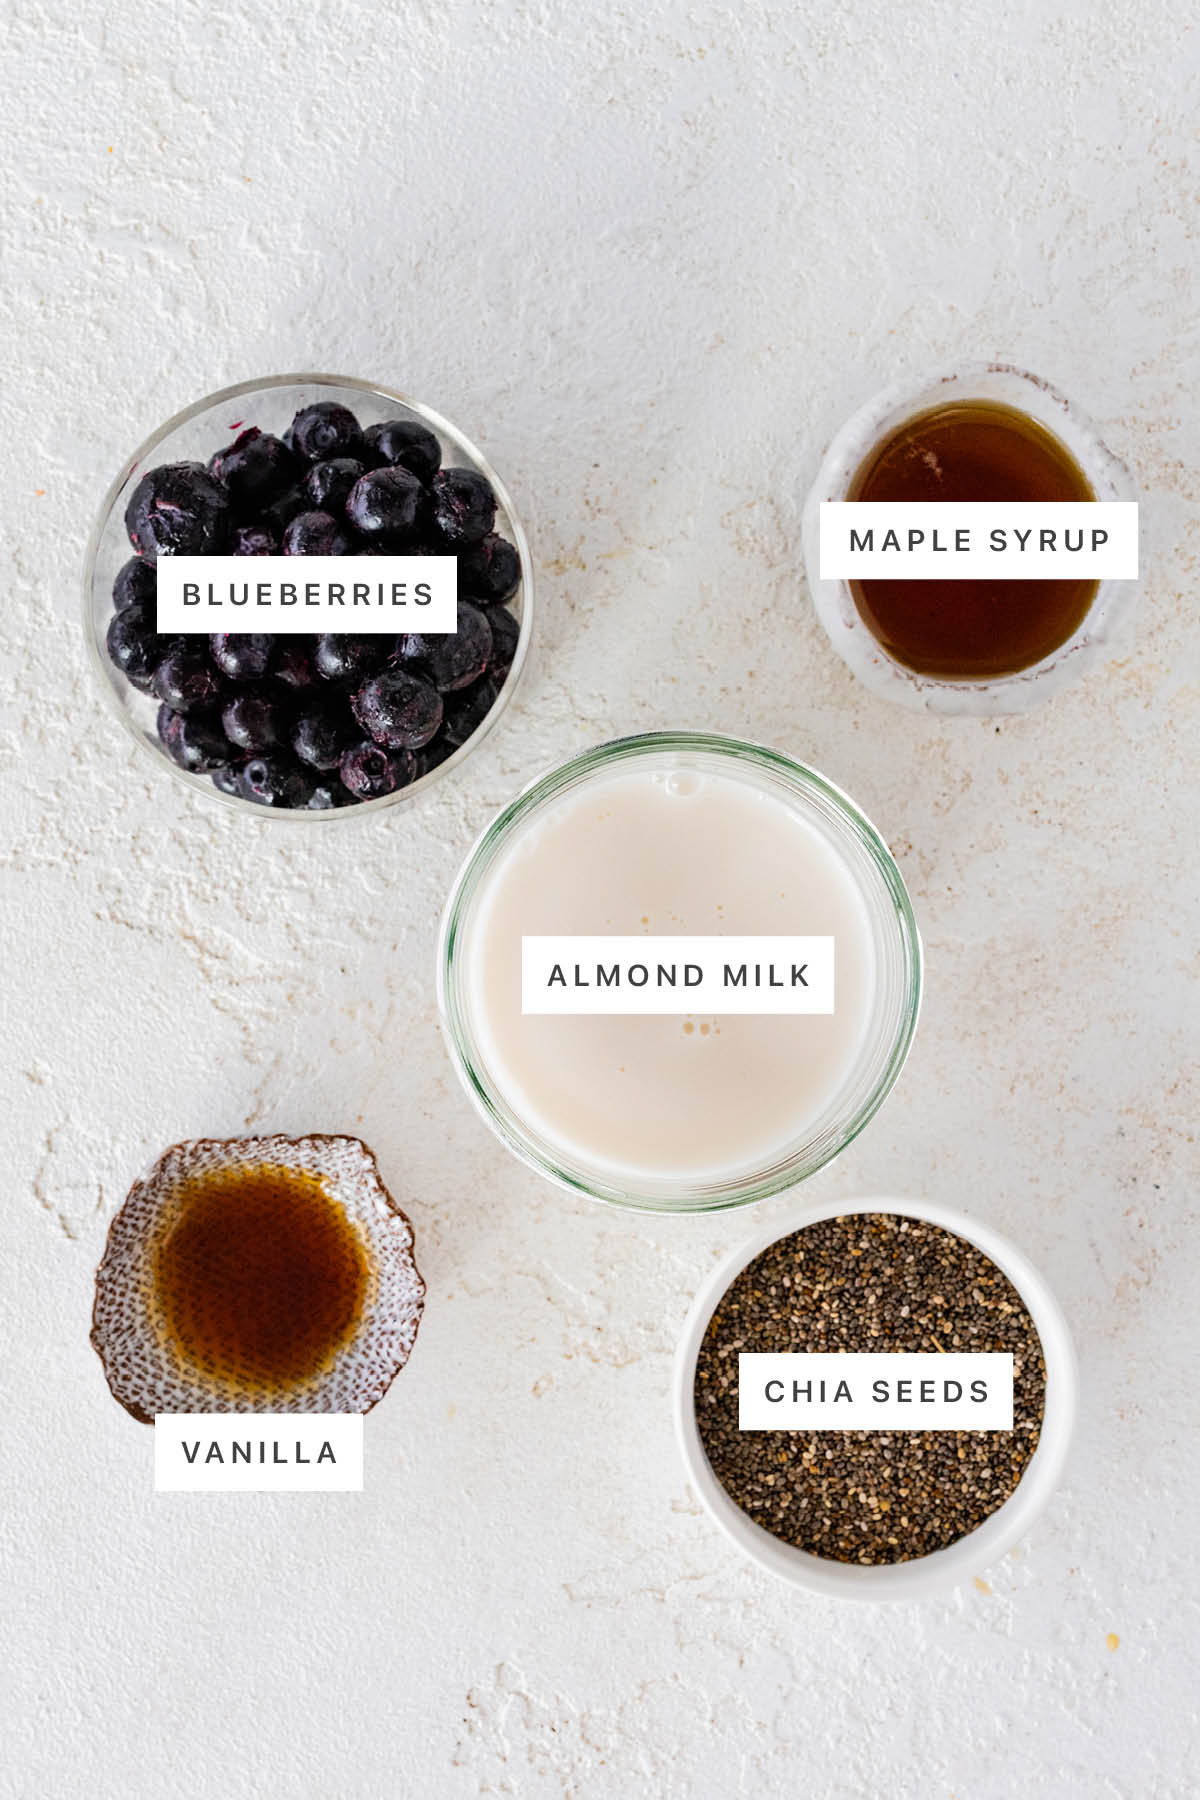 Ingredients measured out to make Blueberry Chia Pudding: blueberries, maple syrup, almond milk, vanilla and chia seeds.